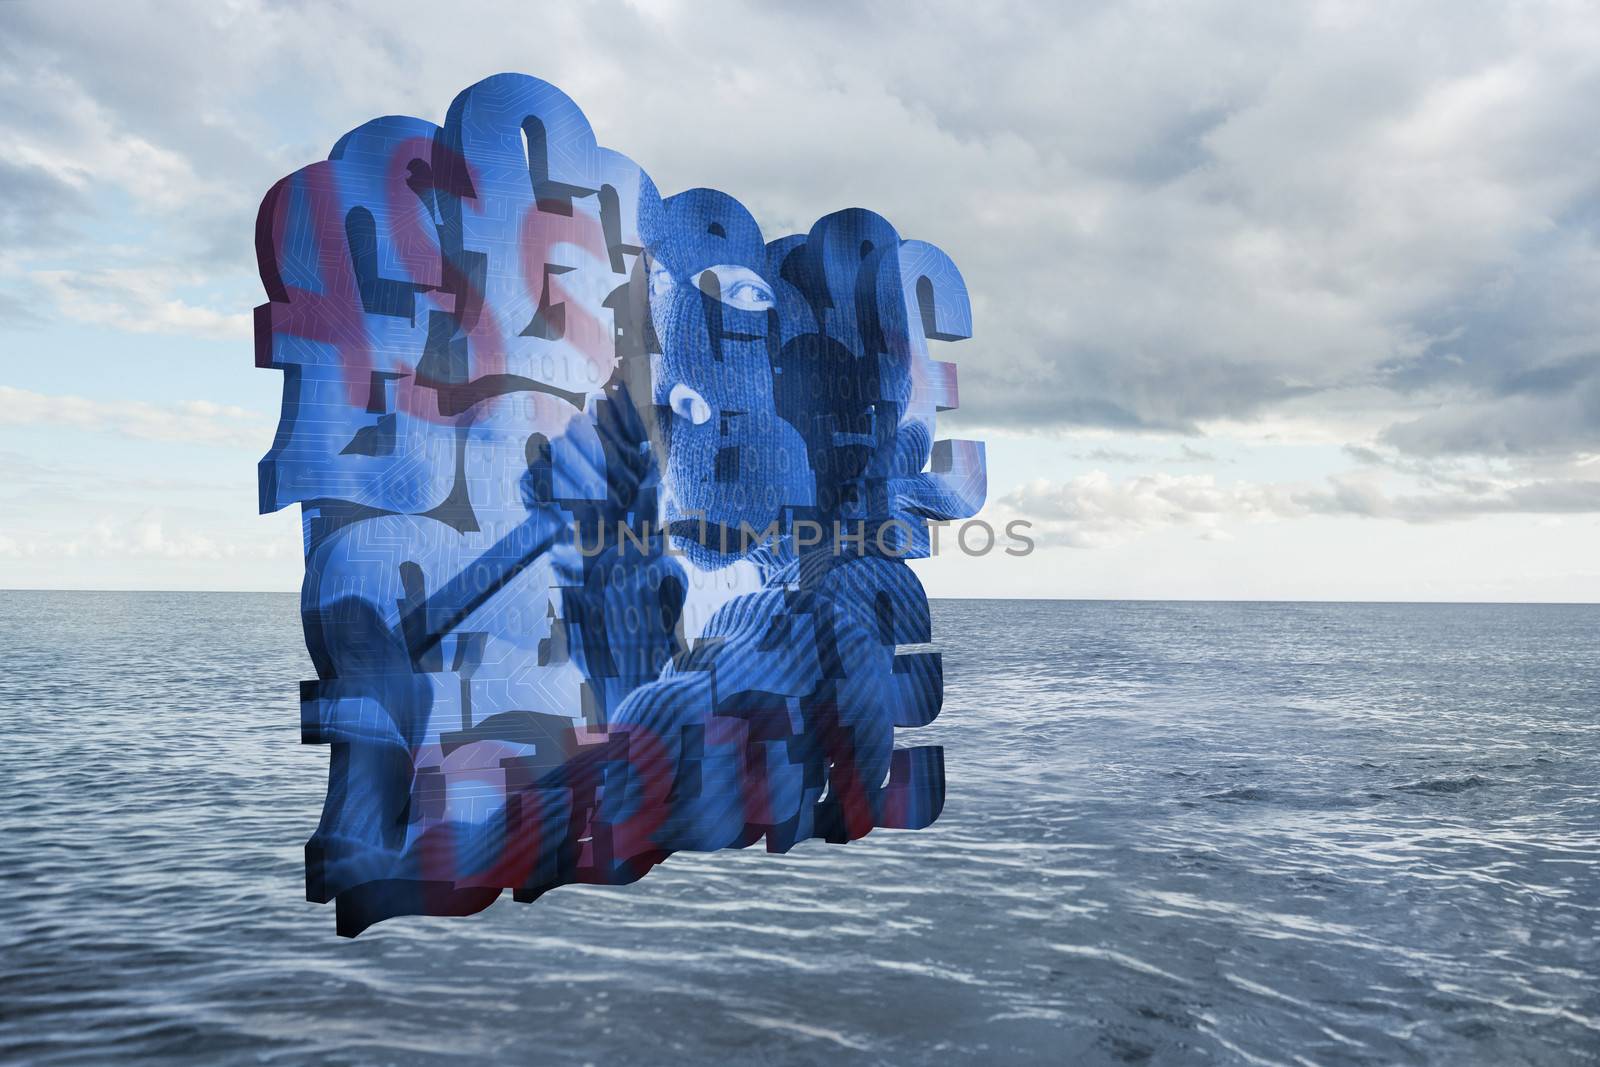 Composite image of burglar on abstract screen by Wavebreakmedia